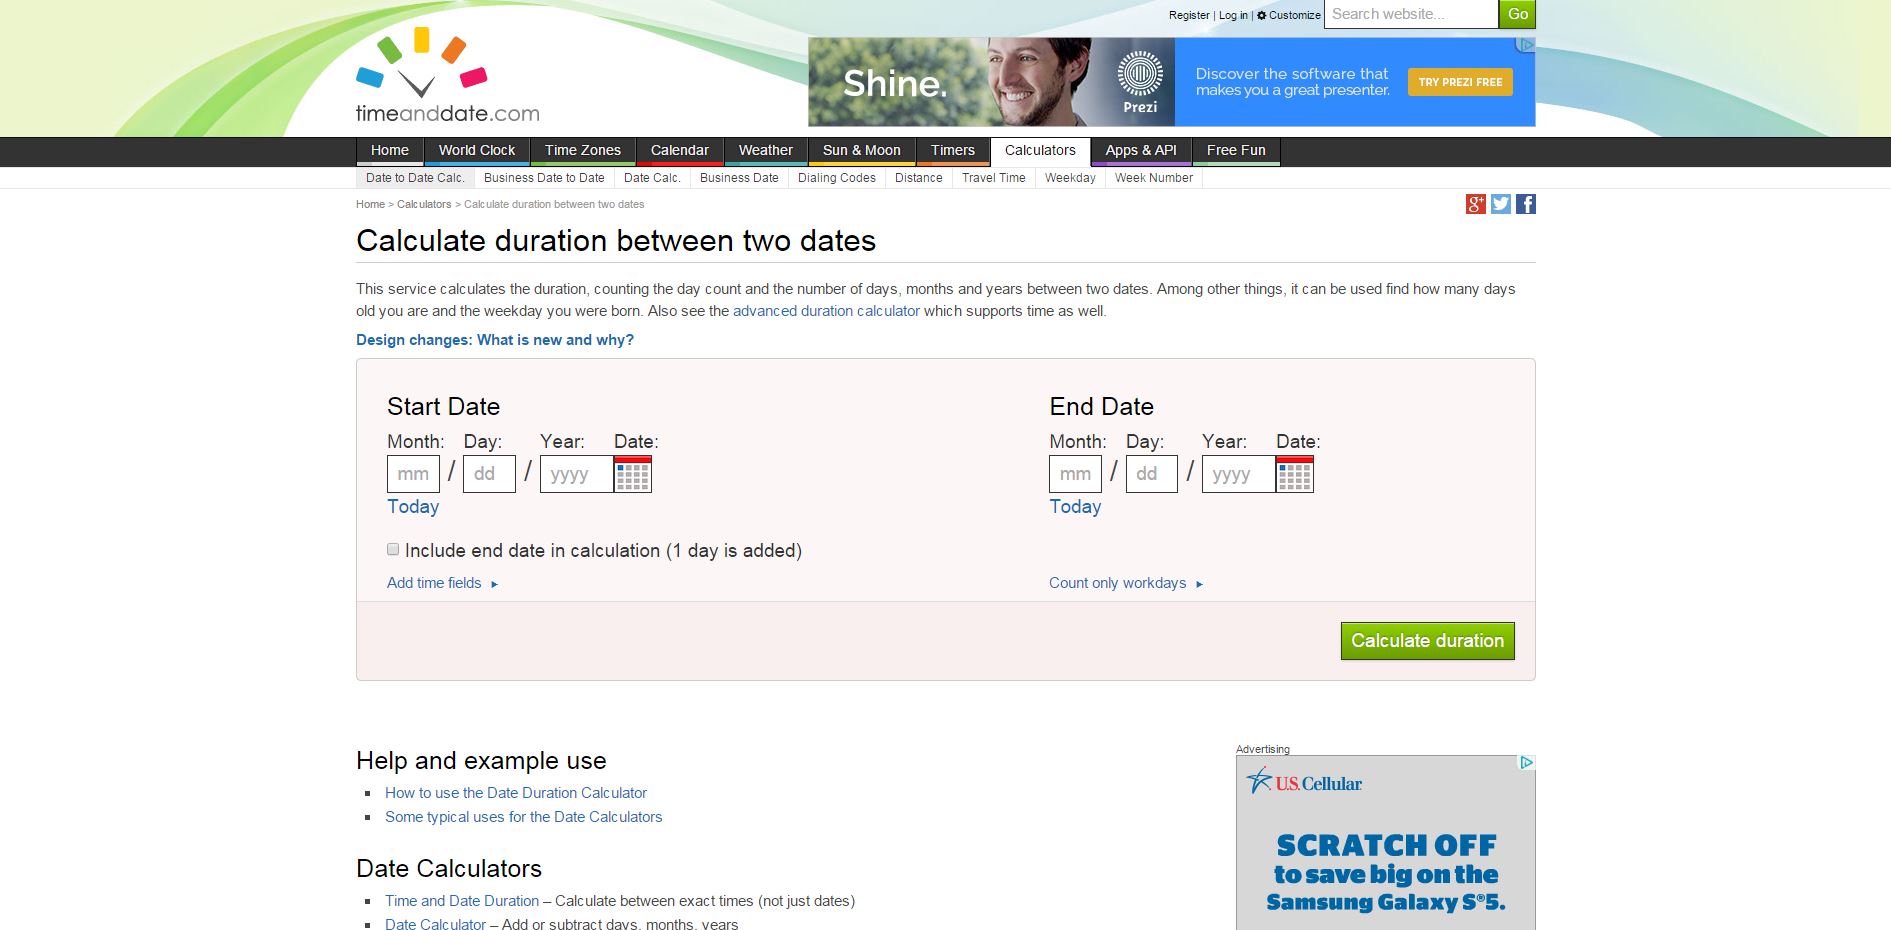 <a href="http://www.timeanddate.com/" target="_blank">timeanddate.com</a> - The Date-to-Date Calculator does just what it sounds like. You put in two dates and it will calculate the time between them. Choose between days, months, or years.